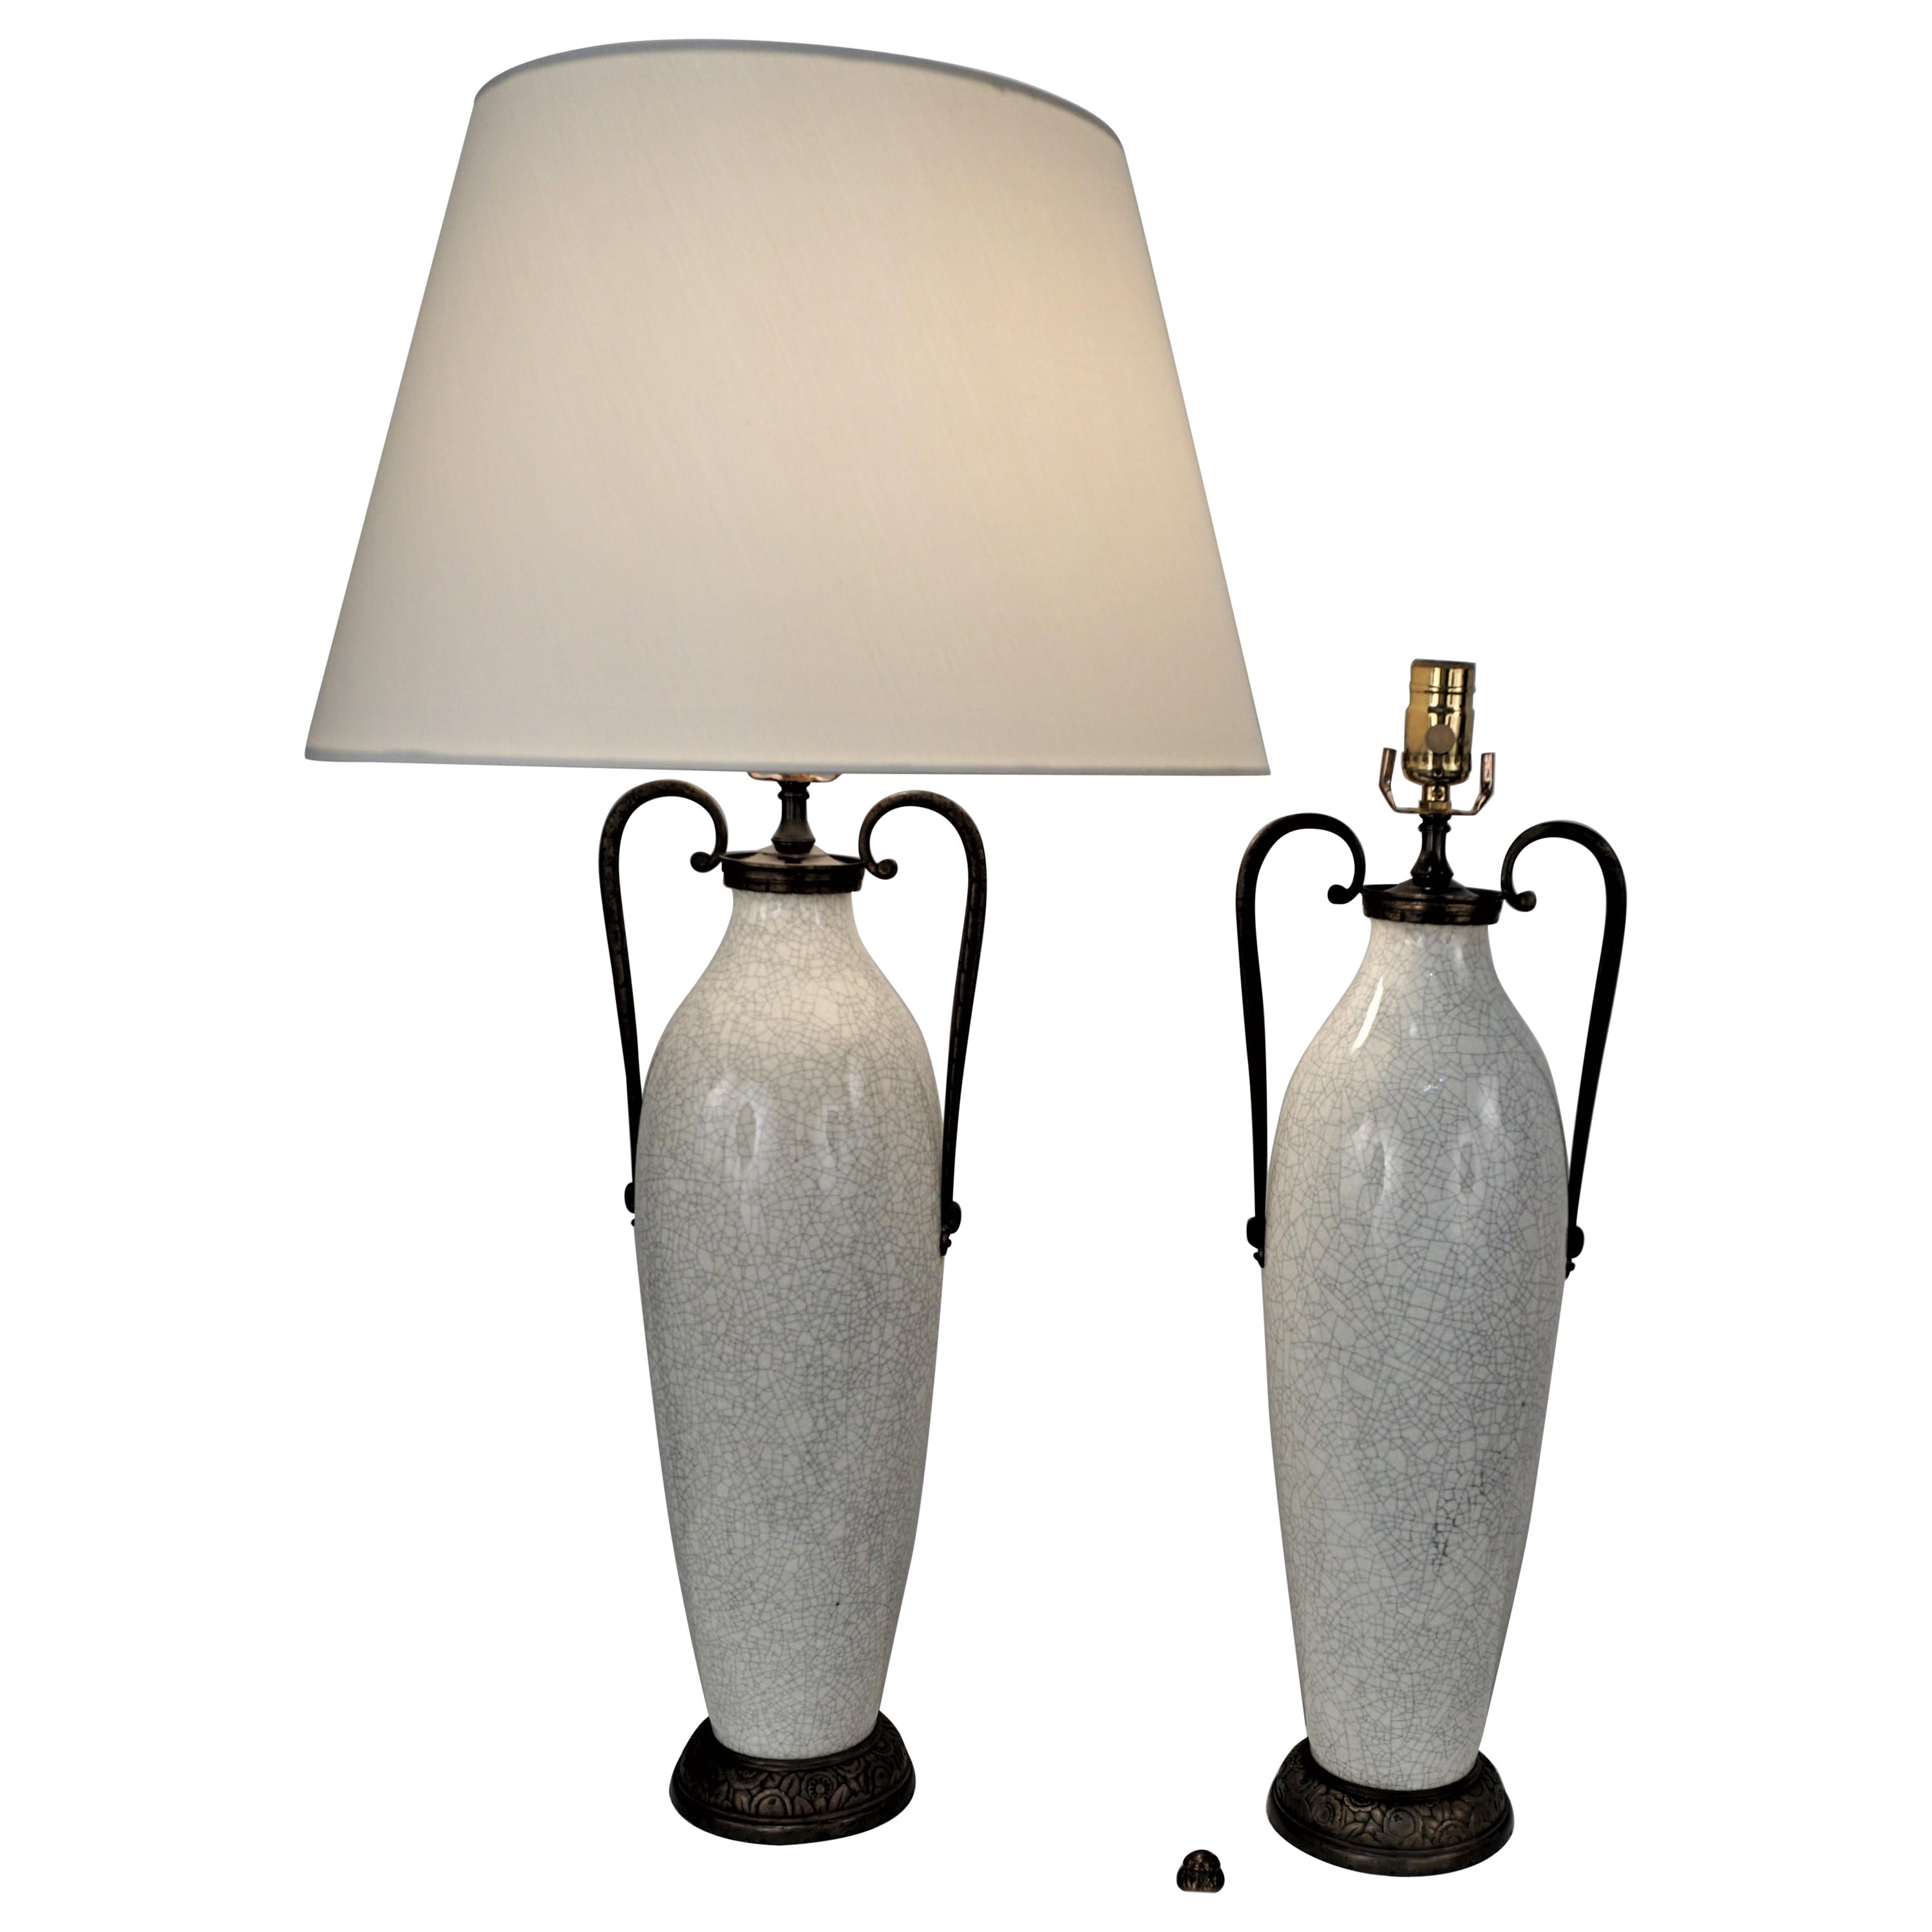 Pair of Crackle White Ceramic and Bronze Table Lamps